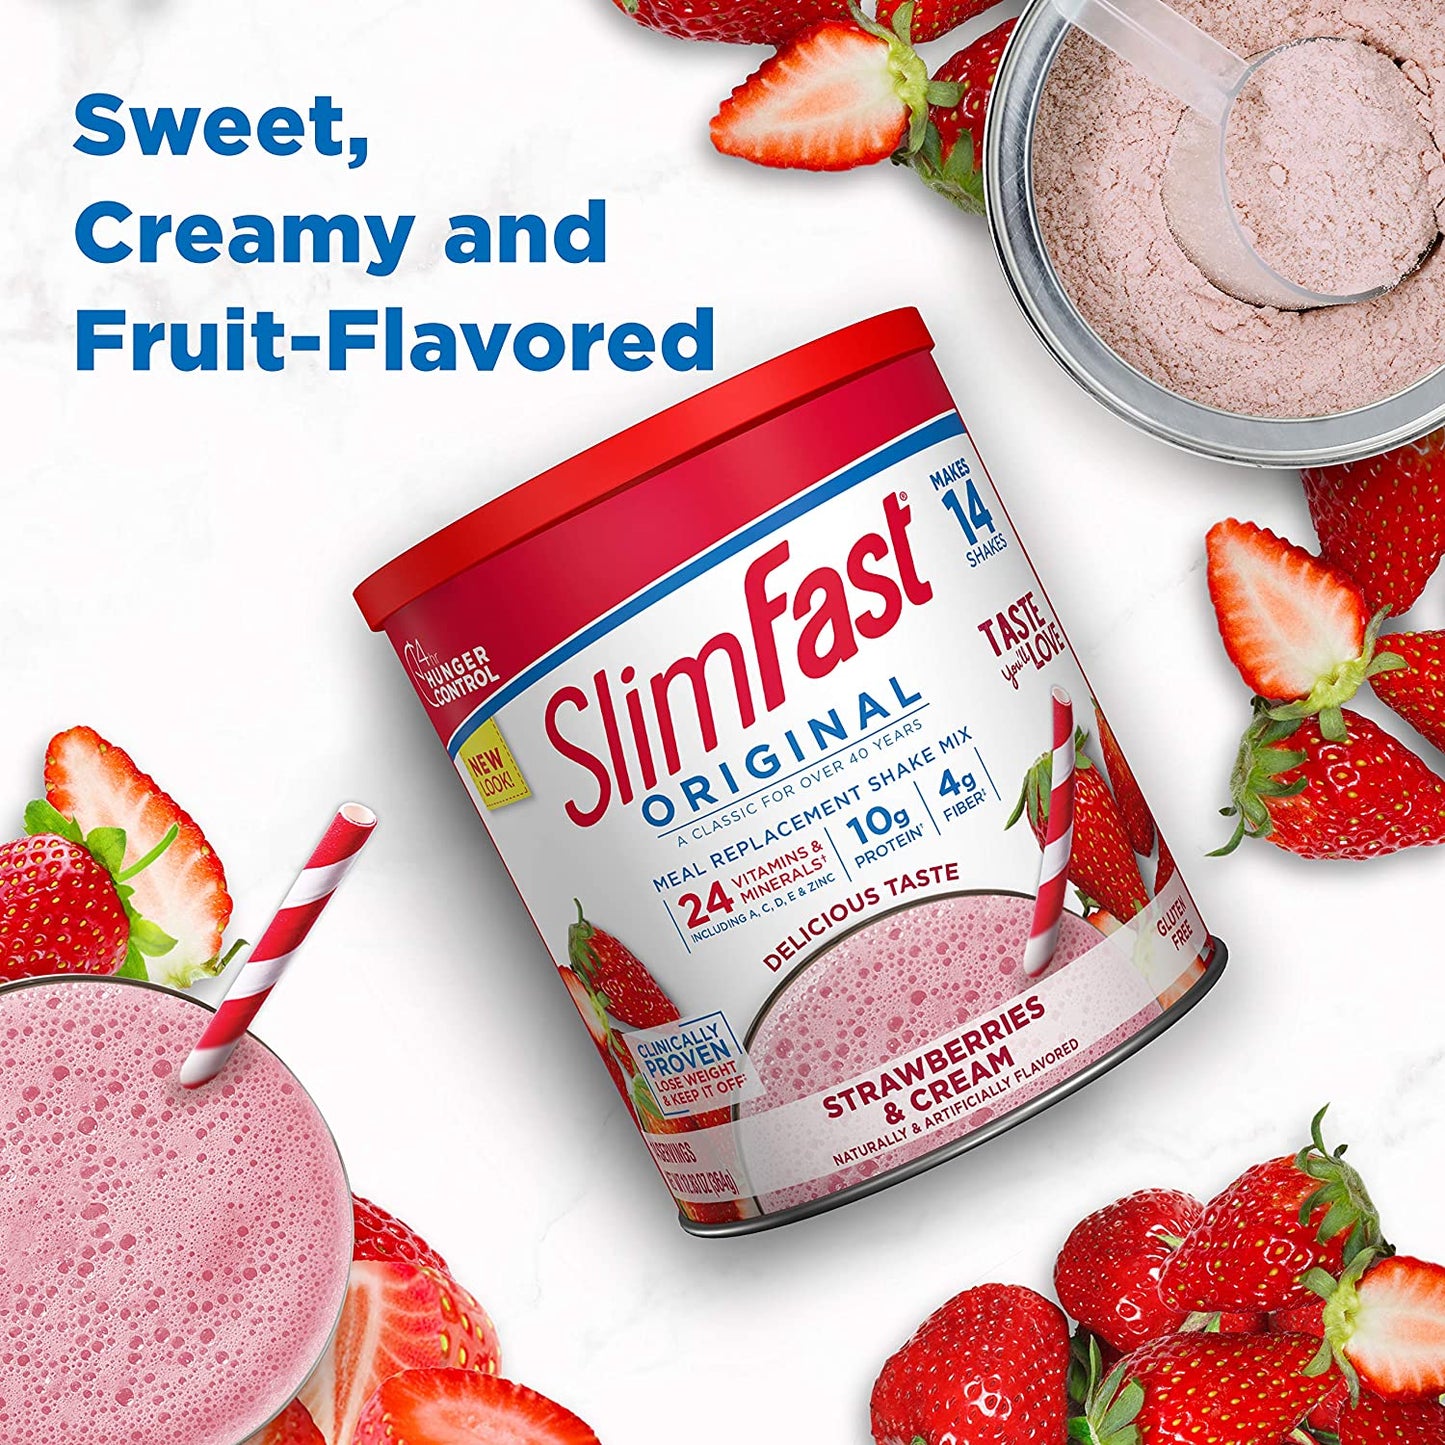 Meal Replacement Powder, Original Strawberries & Cream, Weight Loss Shake Mix, 10G of Protein, 14 Servings